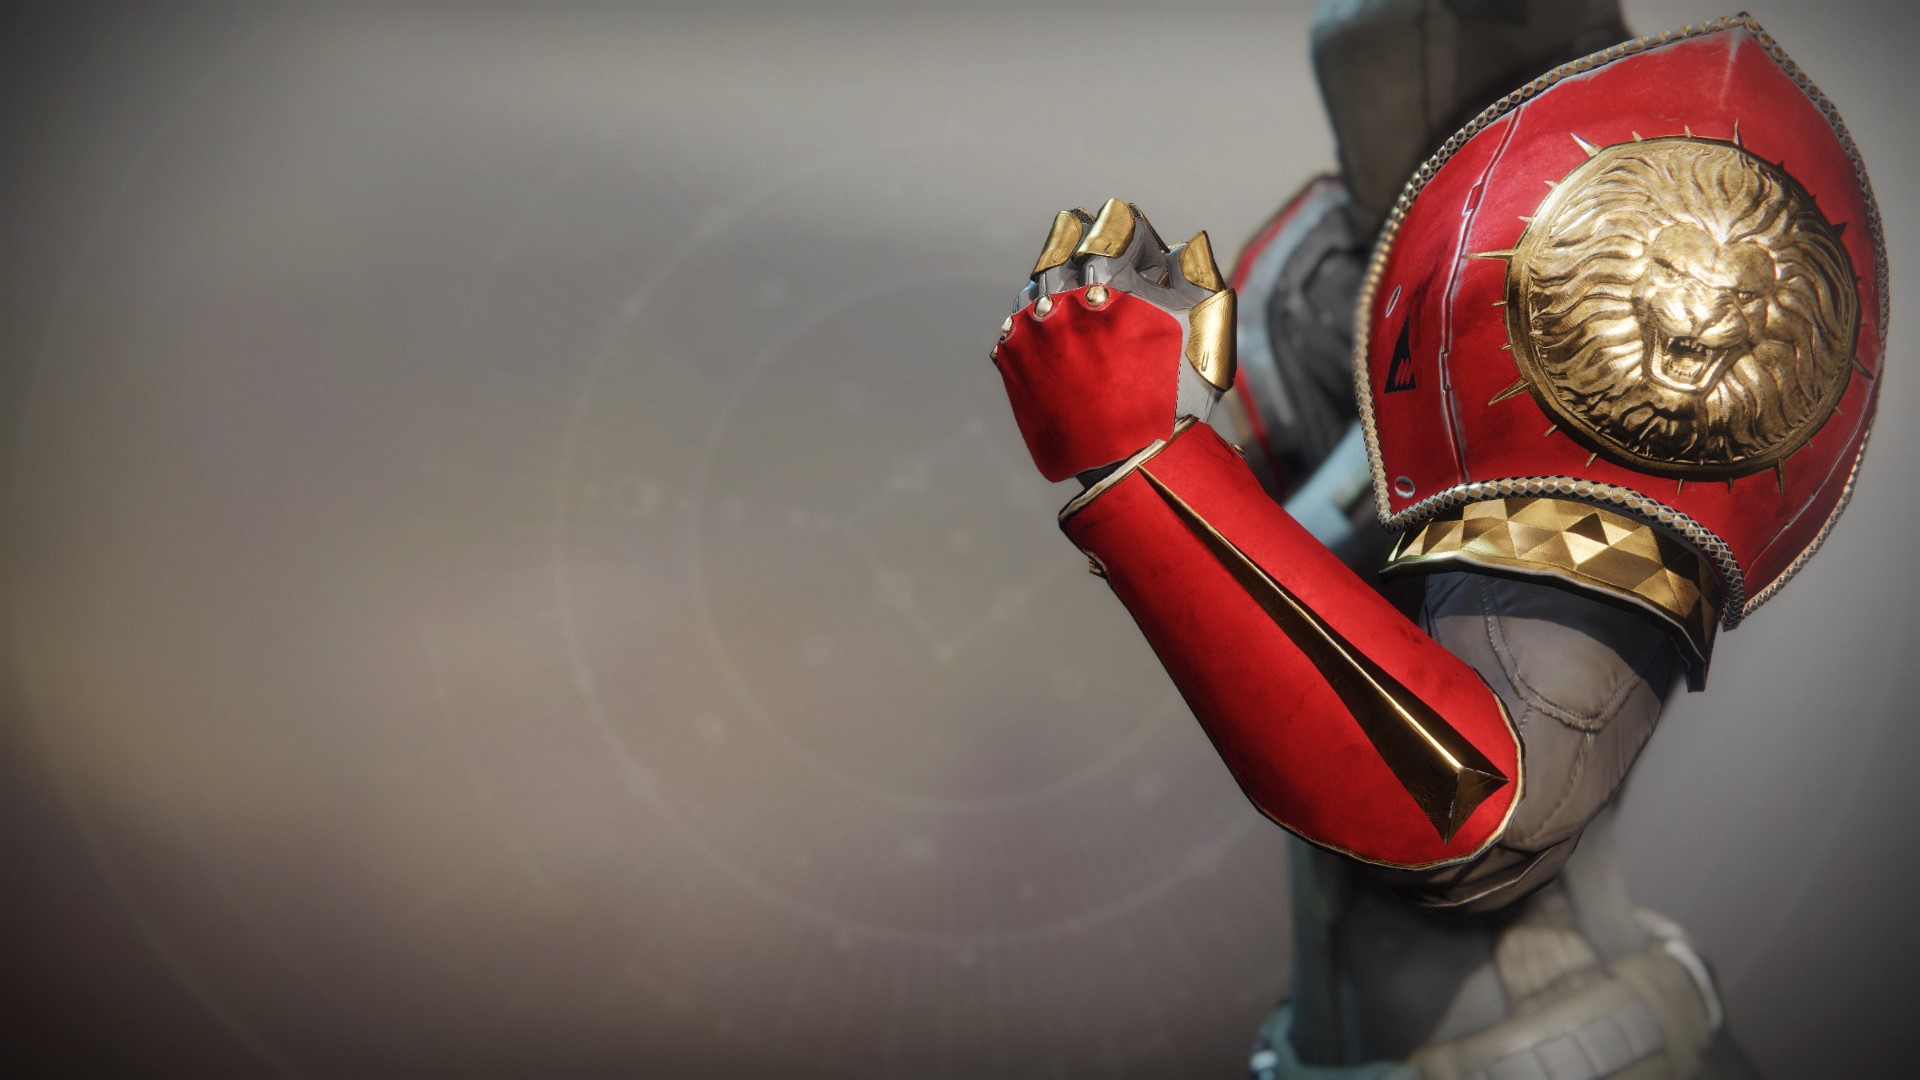 An in-game render of the Sovereign Lion Ornament.